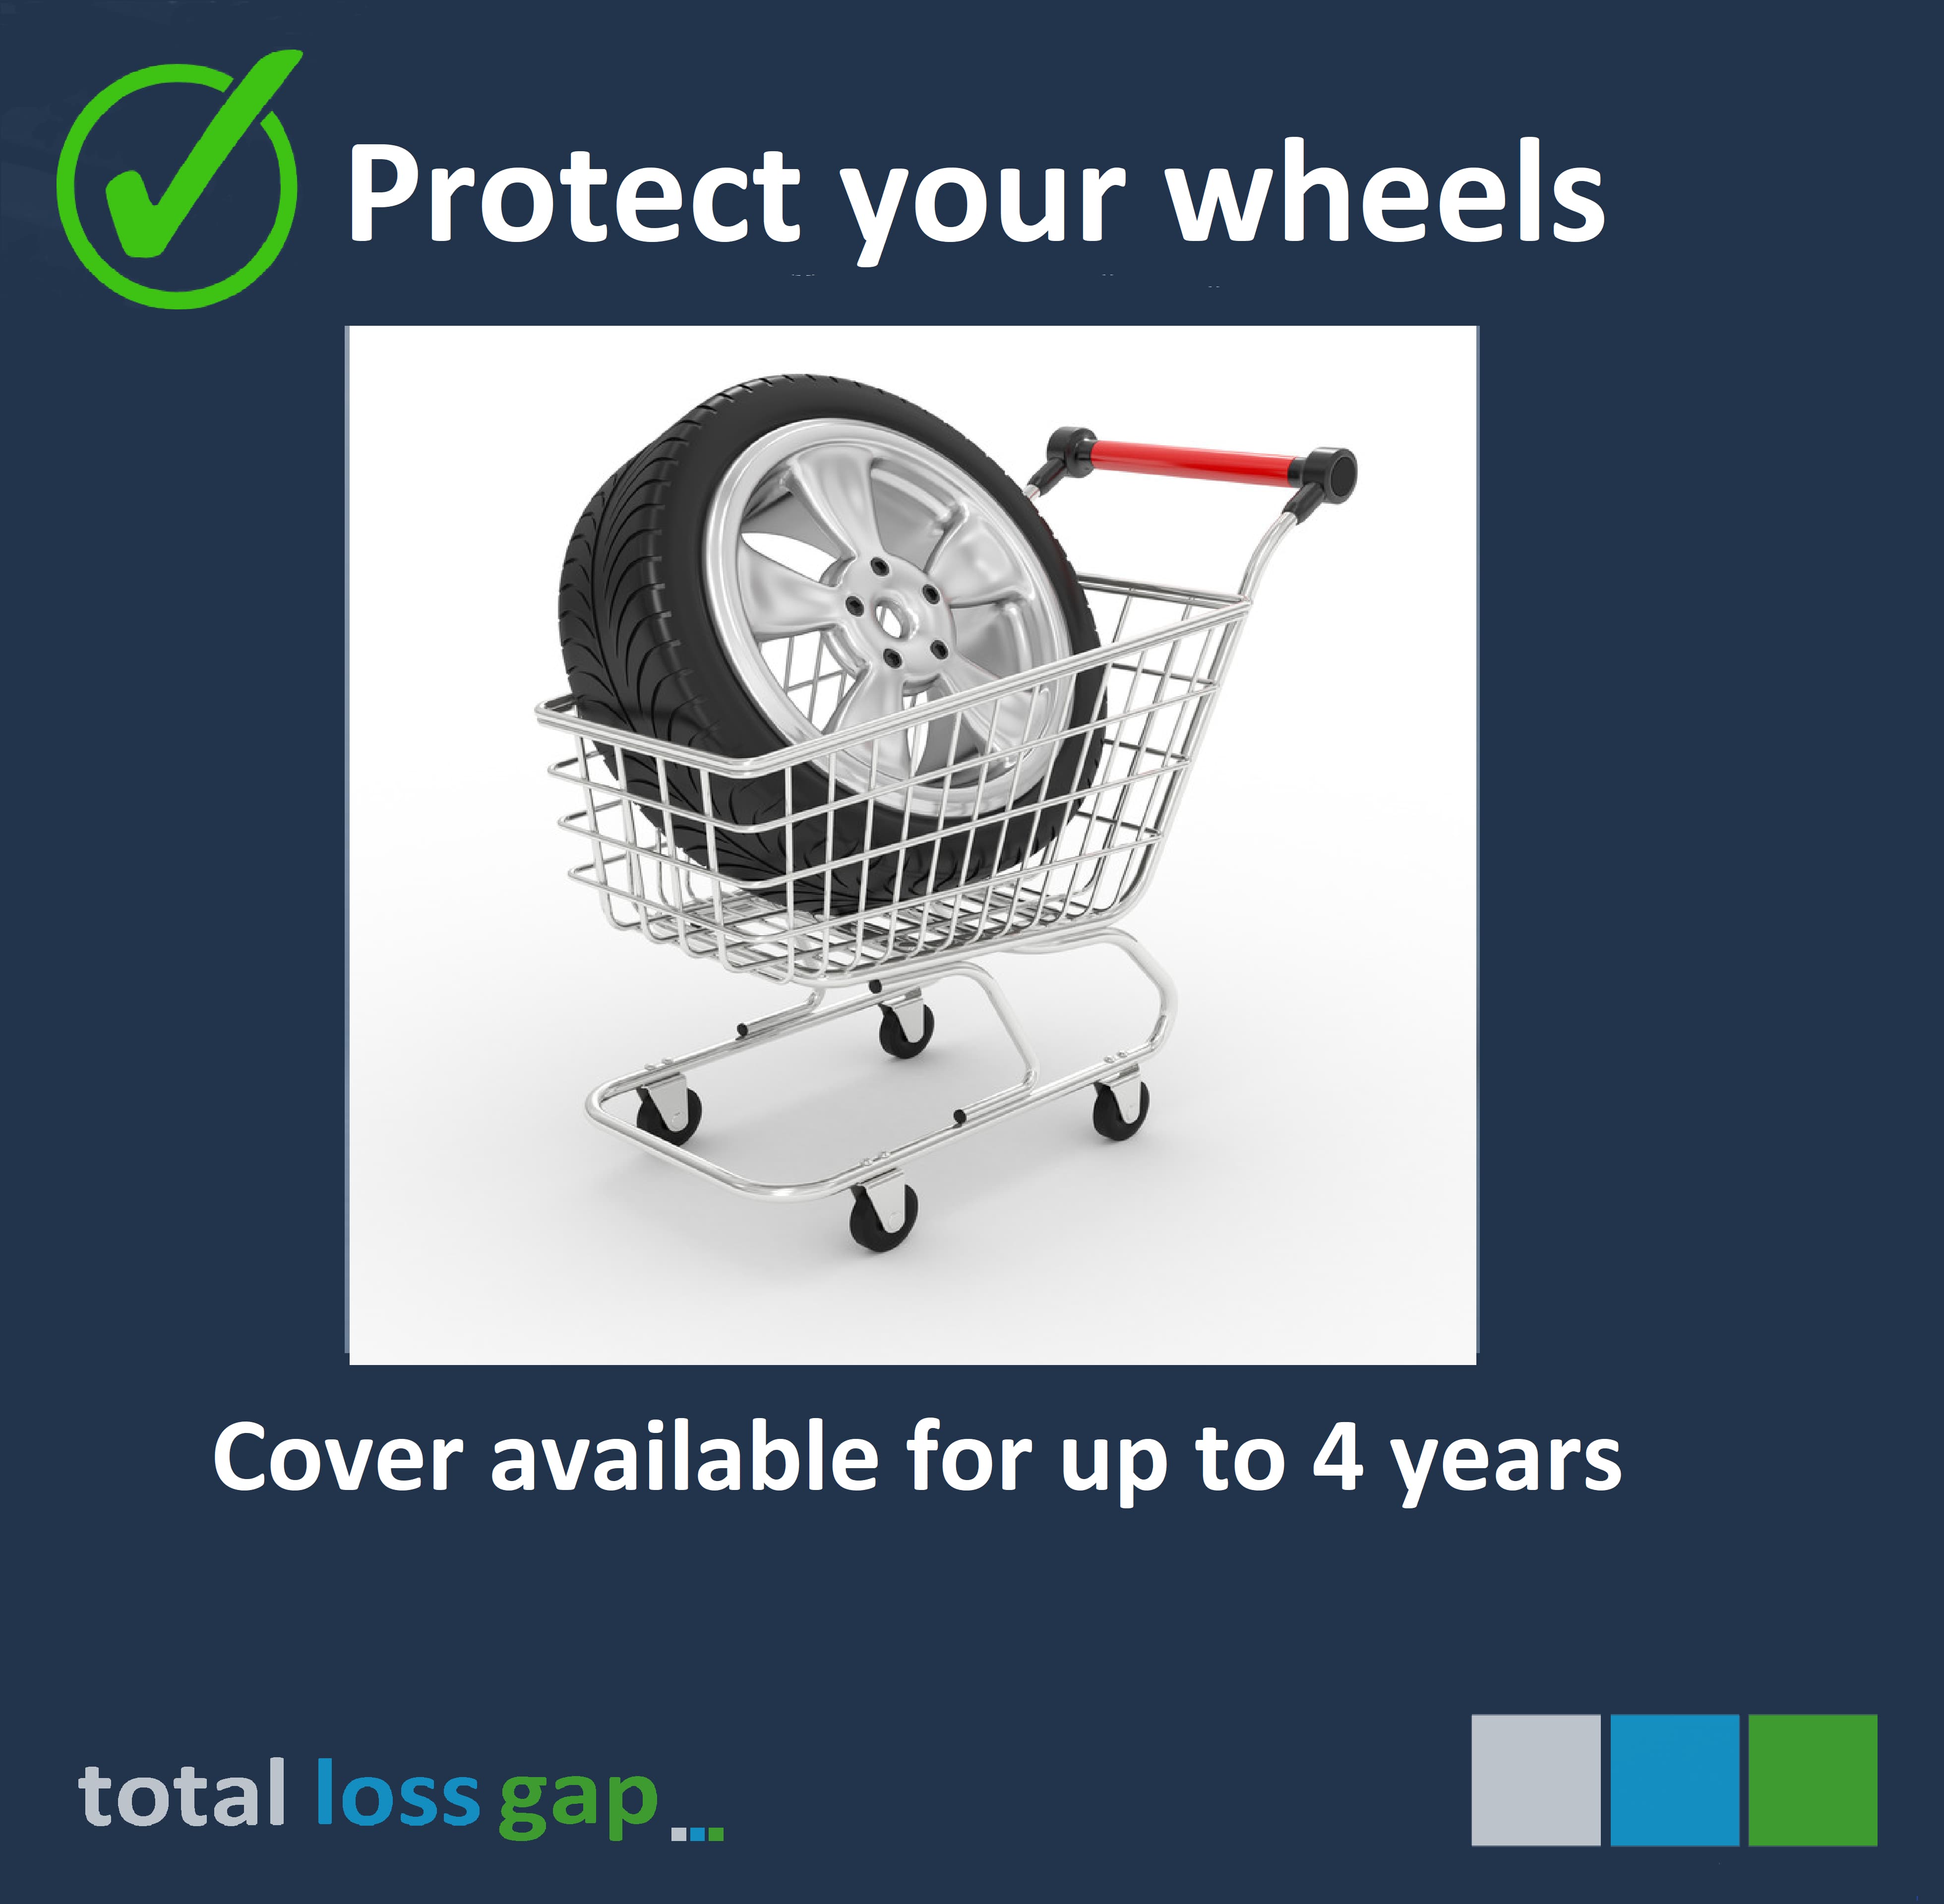 You can buy up to 4 years Tyre and Alloy Wheel Insurance